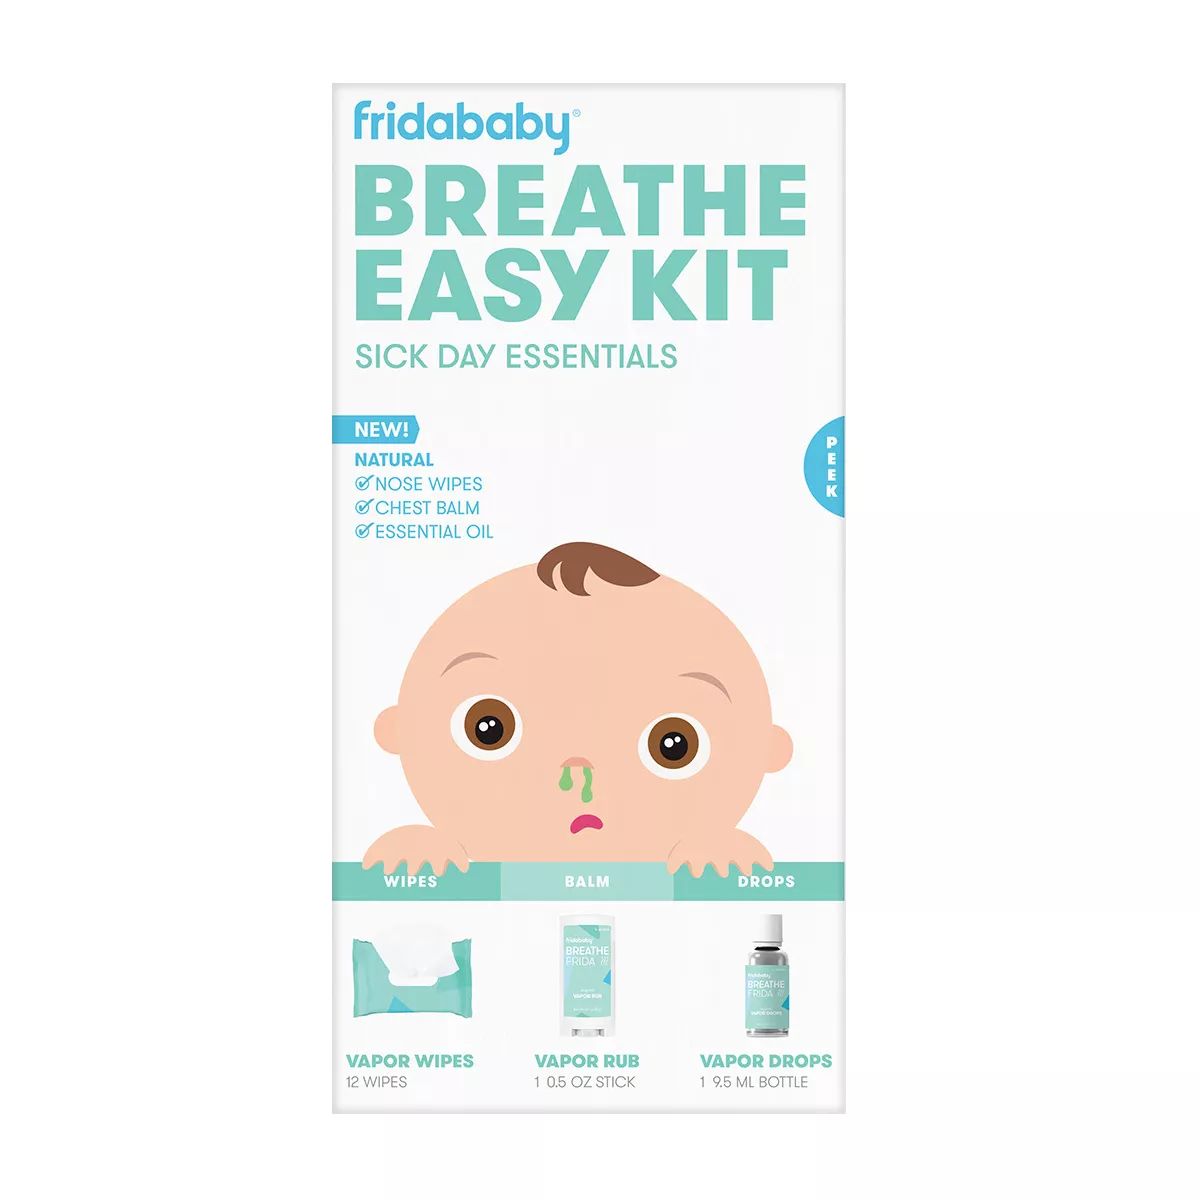 Frida Baby Baby Breathe Easy Kit Sick Day Essentials with Vapor Wipes, Vapor Rub and Vapor Drops | Target